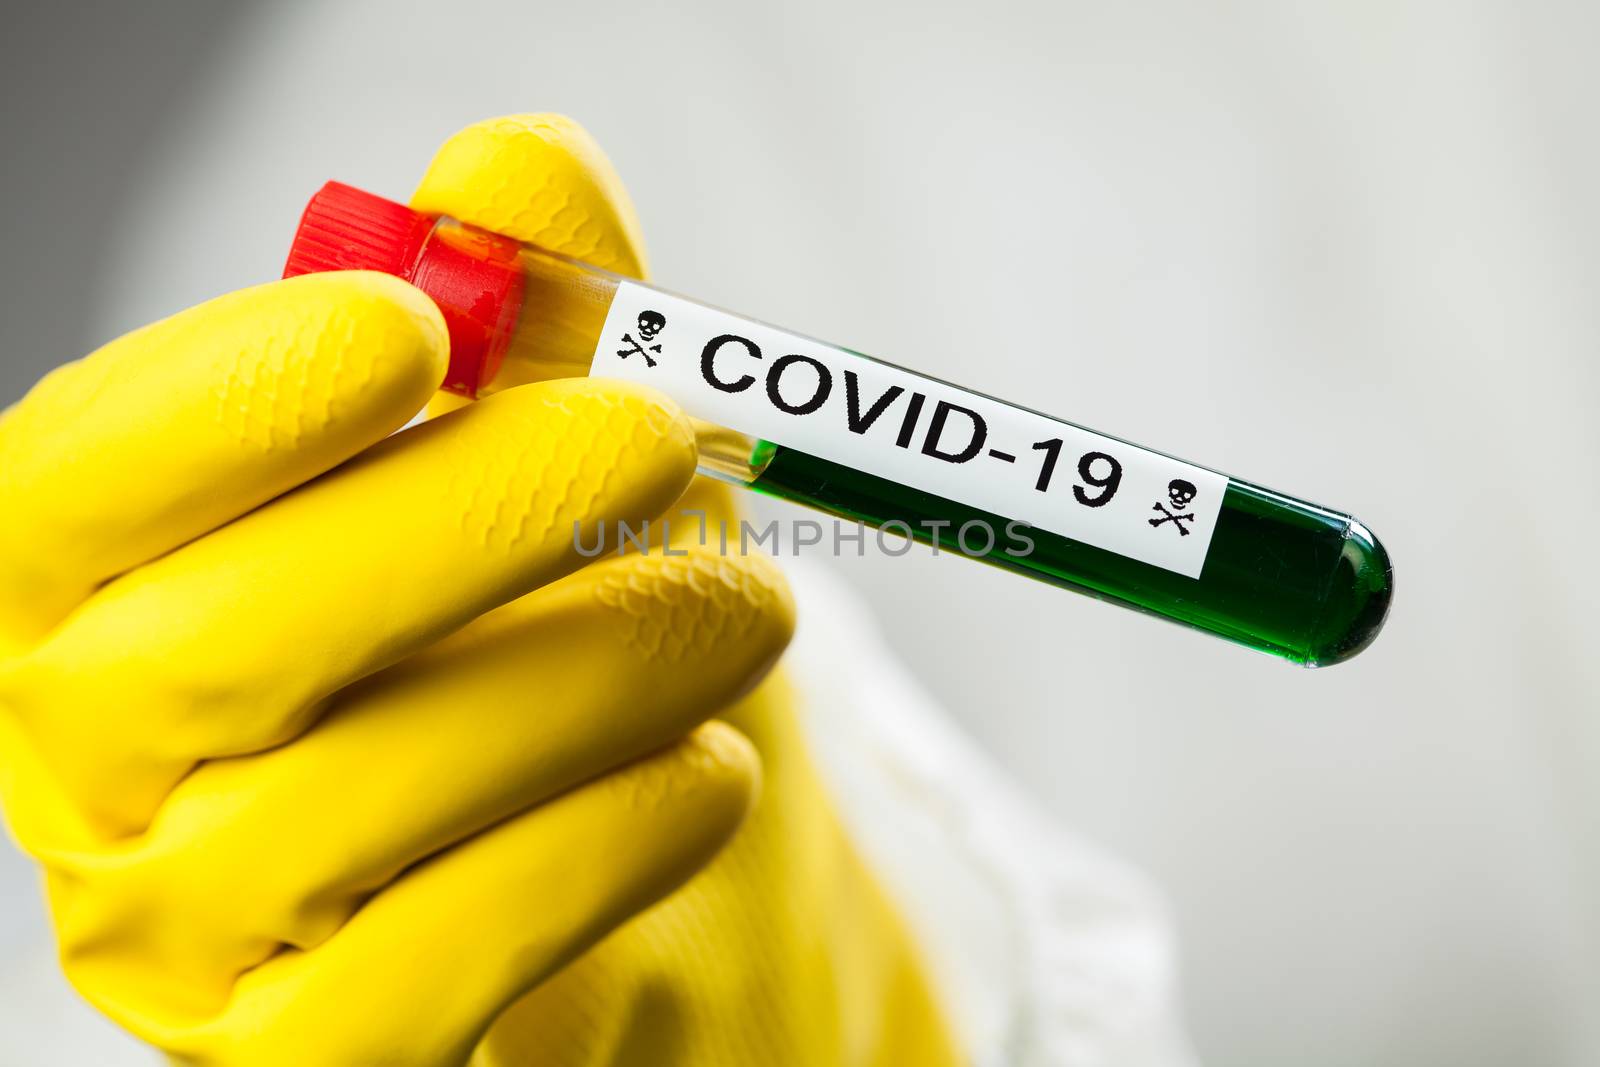 Lab scientist or medical technologist holding test tube with Coronavirus COVID-19 toxic green liquid, science fiction illustration of deadly corona virus, global pandemic crisis outbreak, cure vaccine